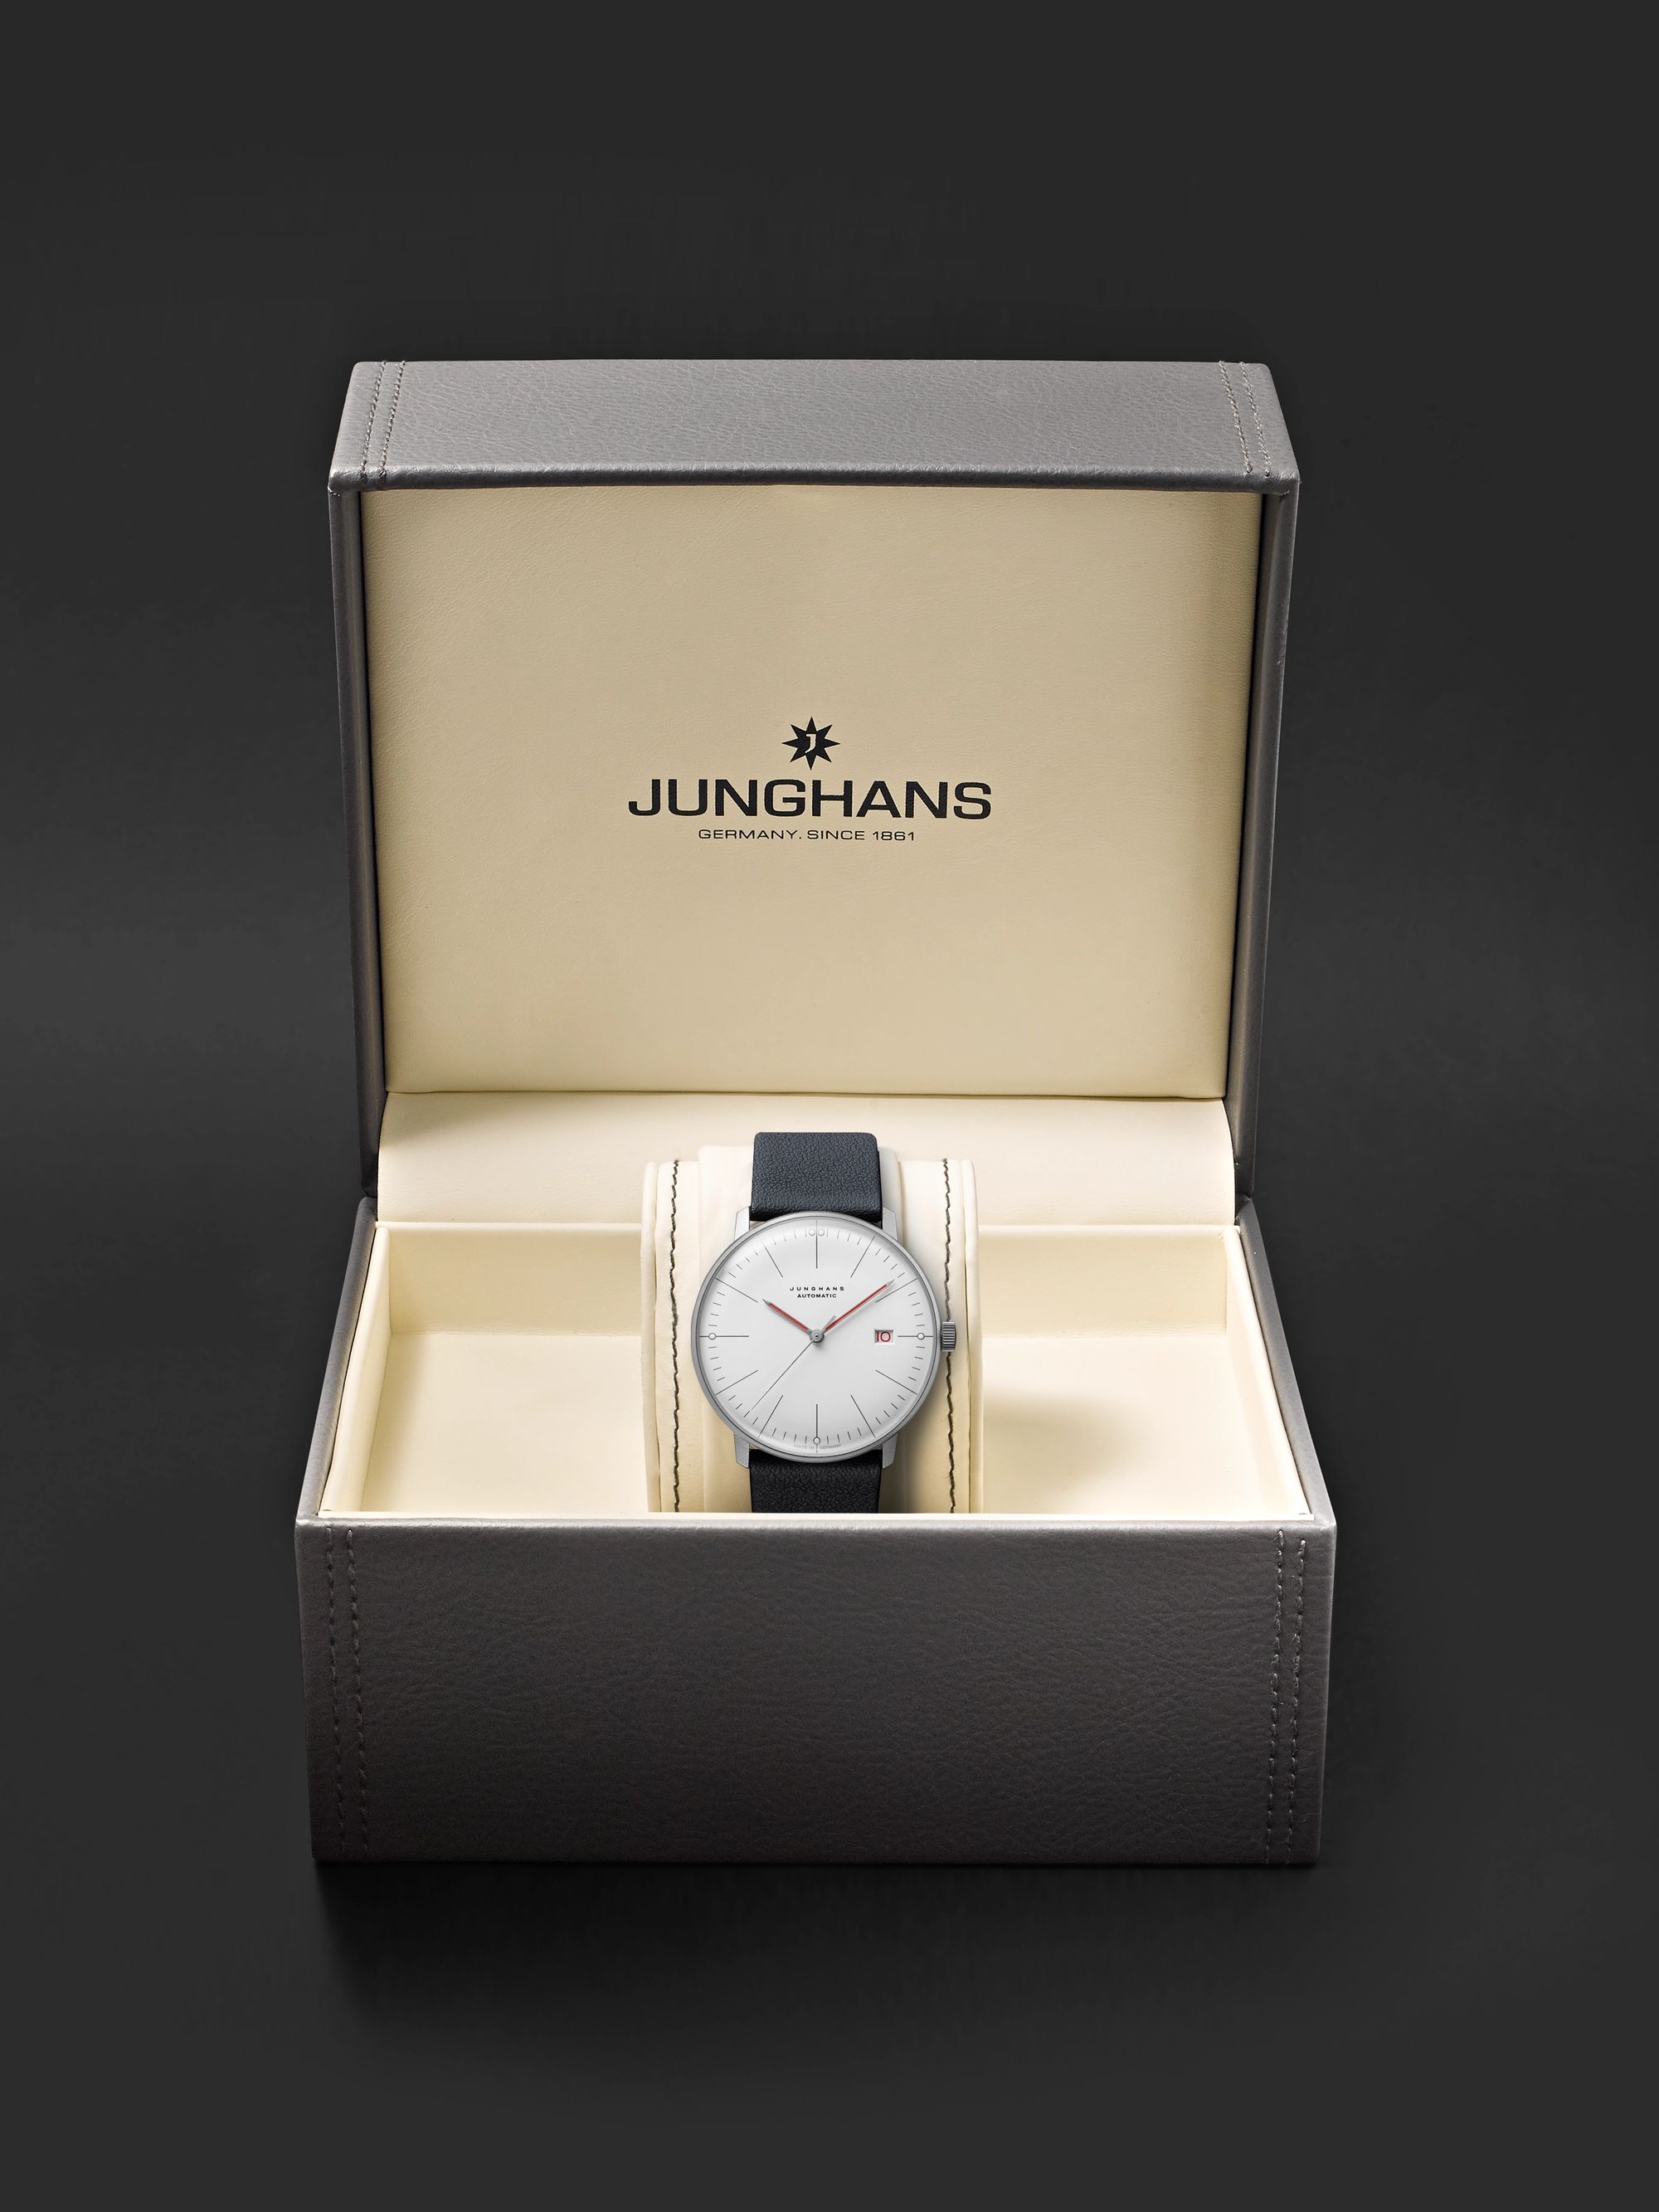 JUNGHANS Max Bill Bauhaus Automatic 38mm Stainless Steel and Textured-Leather Watch, Ref. No. 027/4009.02